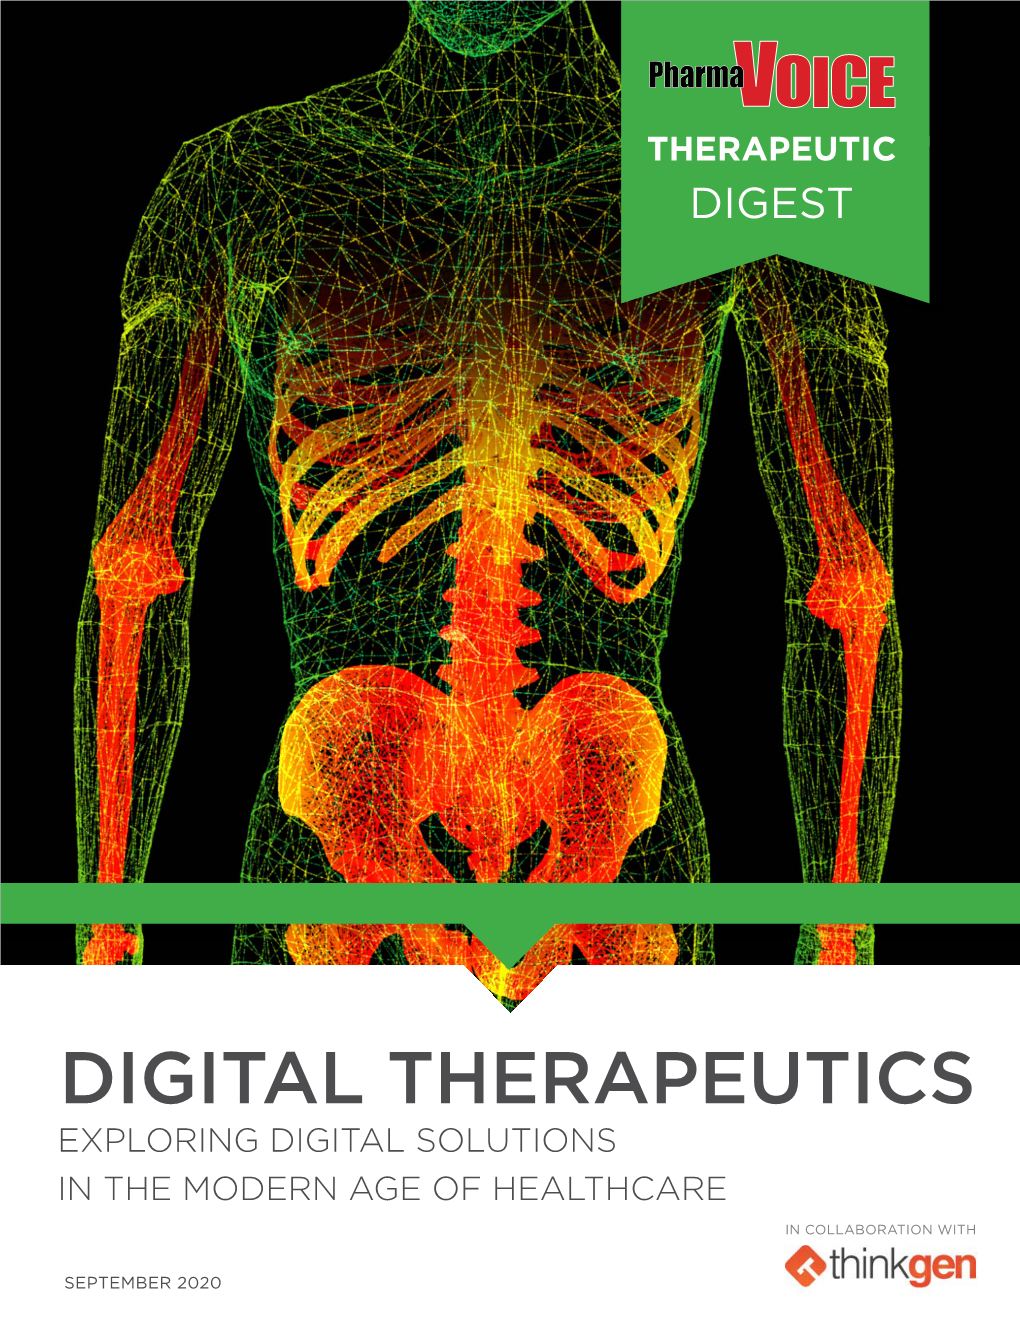 Digital Therapeutics Exploring Digital Solutions in the Modern Age of Healthcare